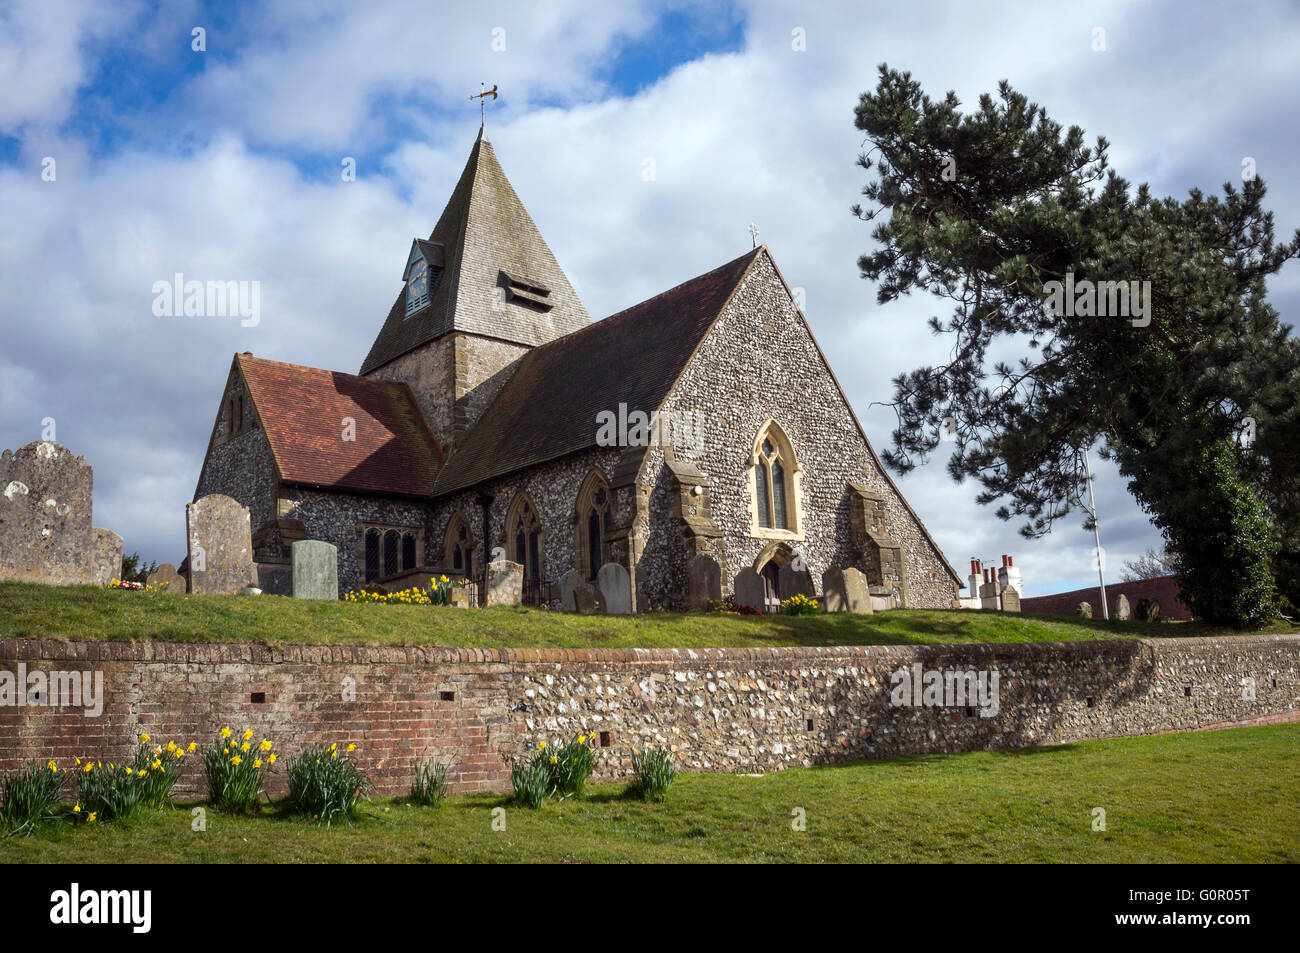 The Church of St Margaret of Antioch in Ditchling, East Sussex, UK Stock Photo